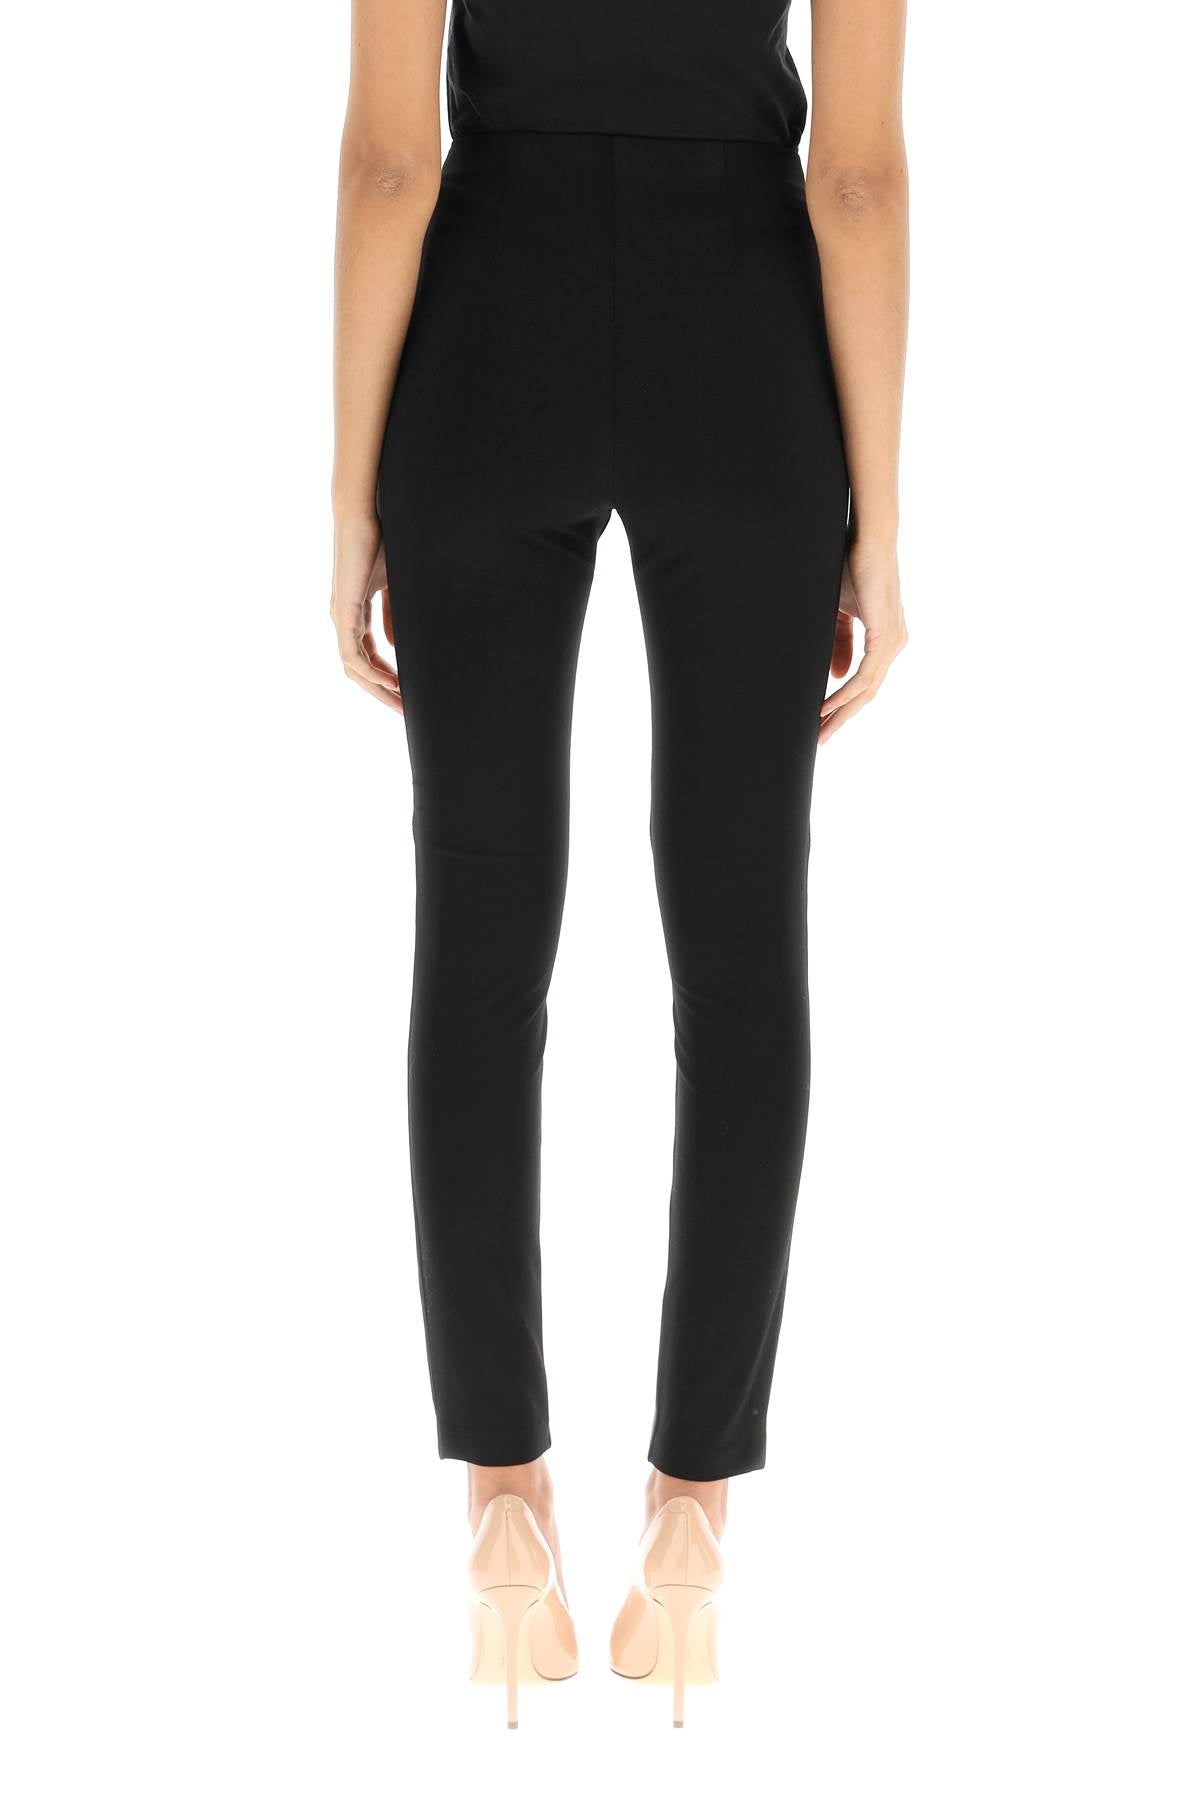 Marciano by guess leather and jersey leggings-2